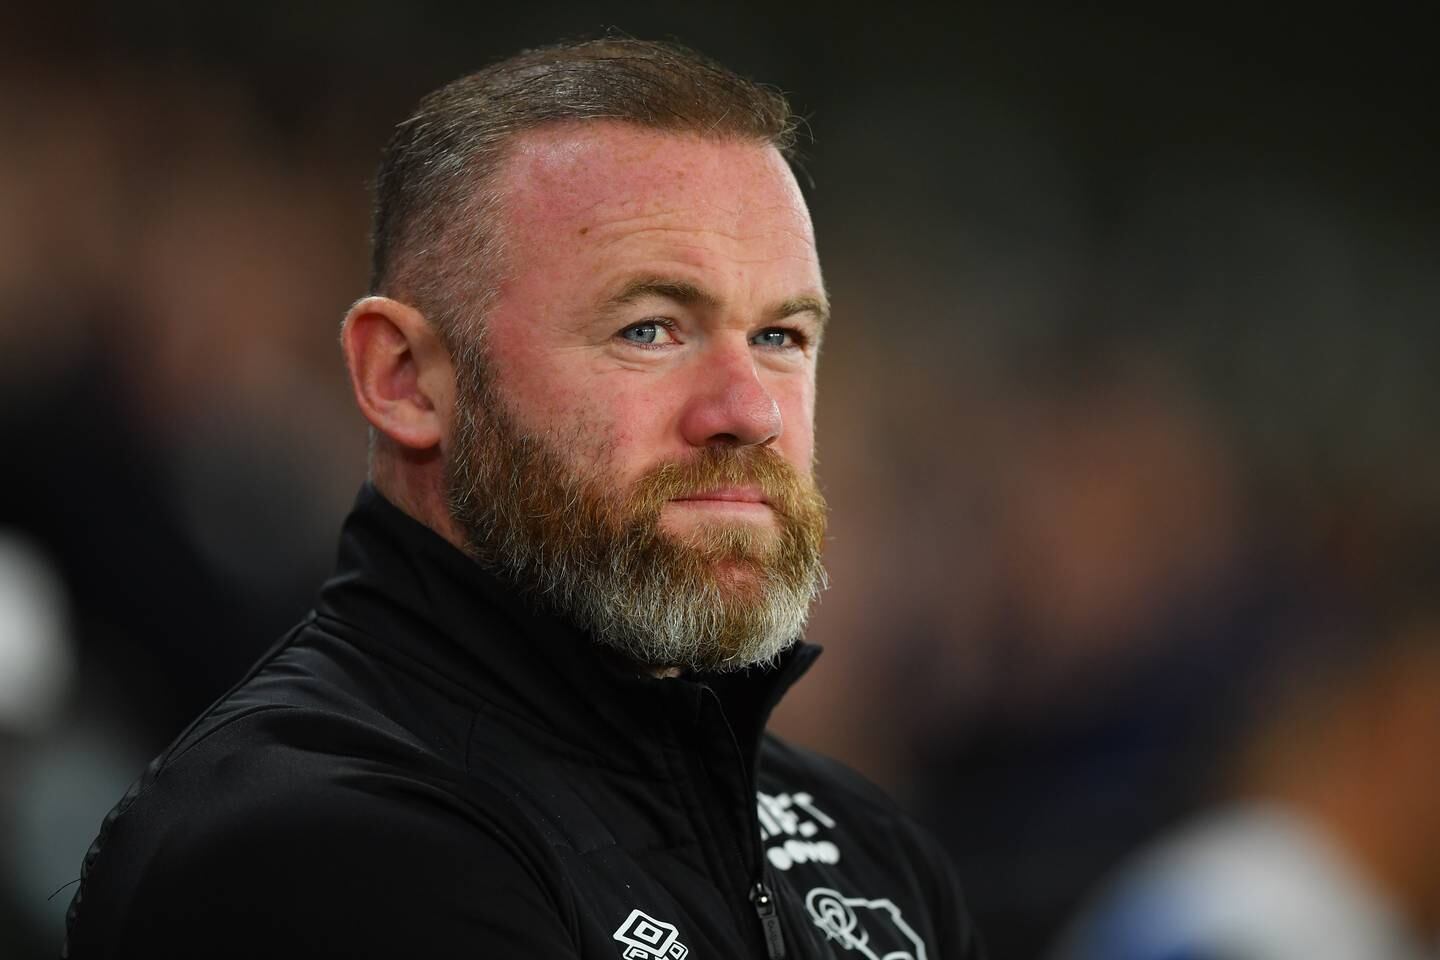 Wayne Rooney has made a promising start to his managerial career